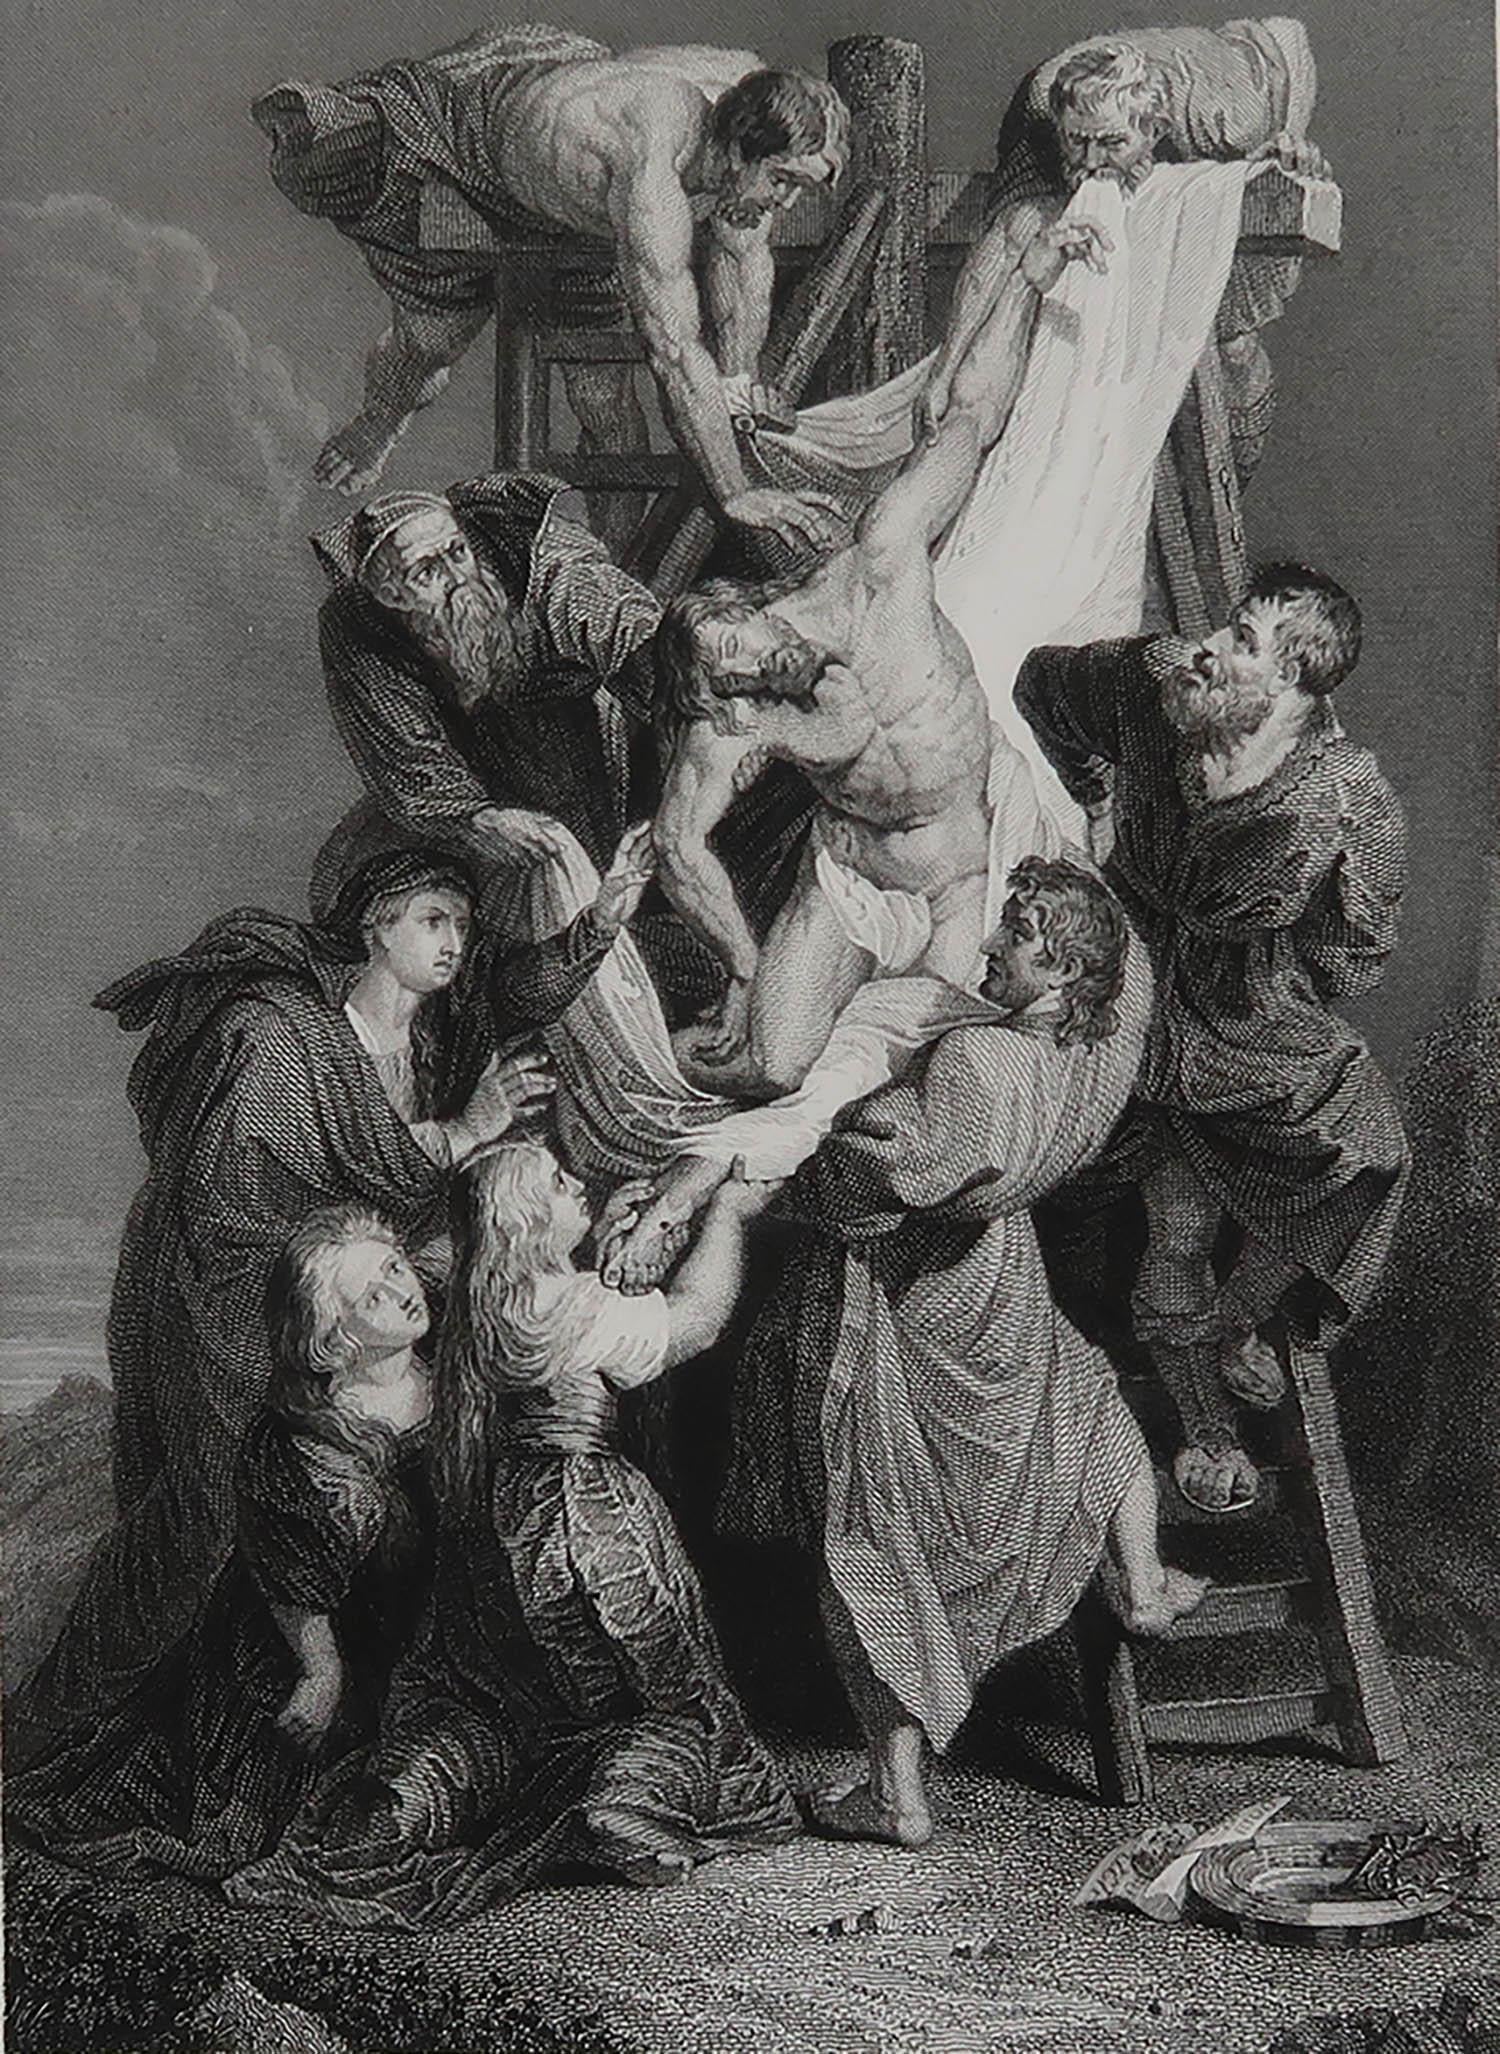 Wonderful image after Rubens

Fine steel engraving. 

Published by Fisher, London, dated 1838

Unframed.

